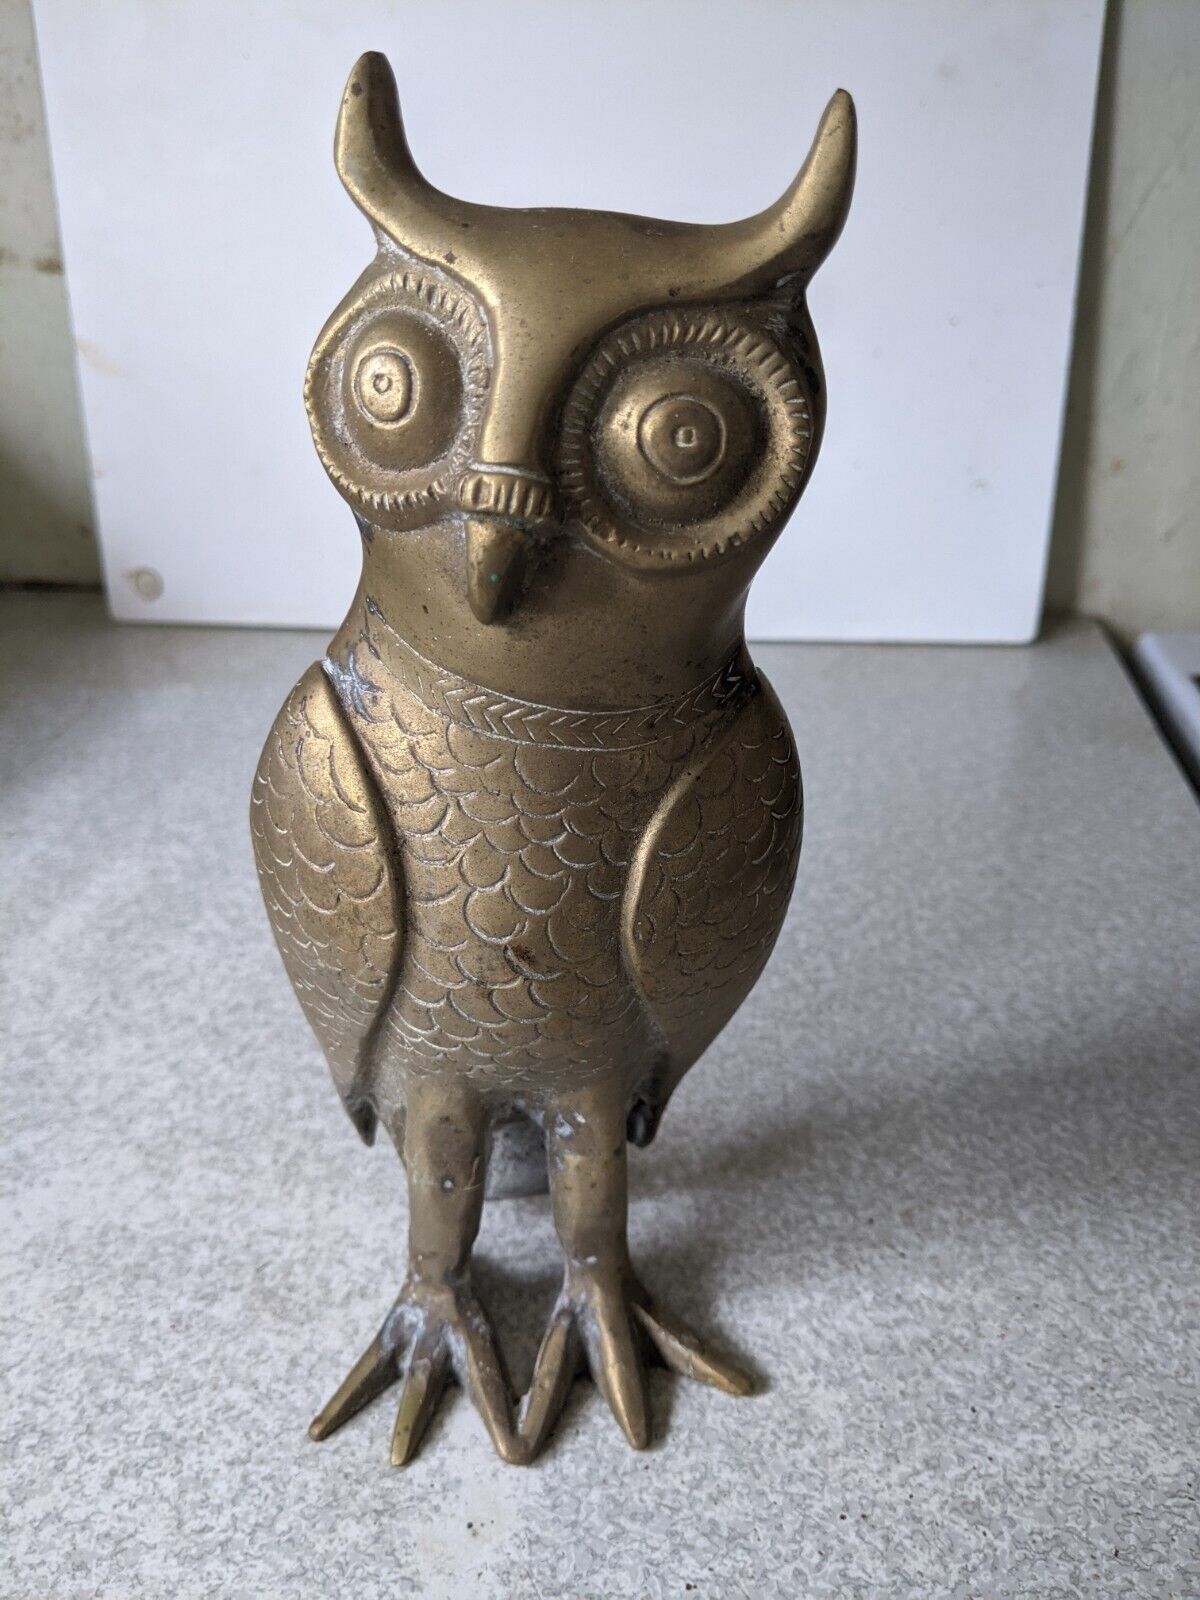 LOVELY  HEAVY VINTAGE BRASS OWL FIGURE / FIGURINE - 8 INCHES TALL